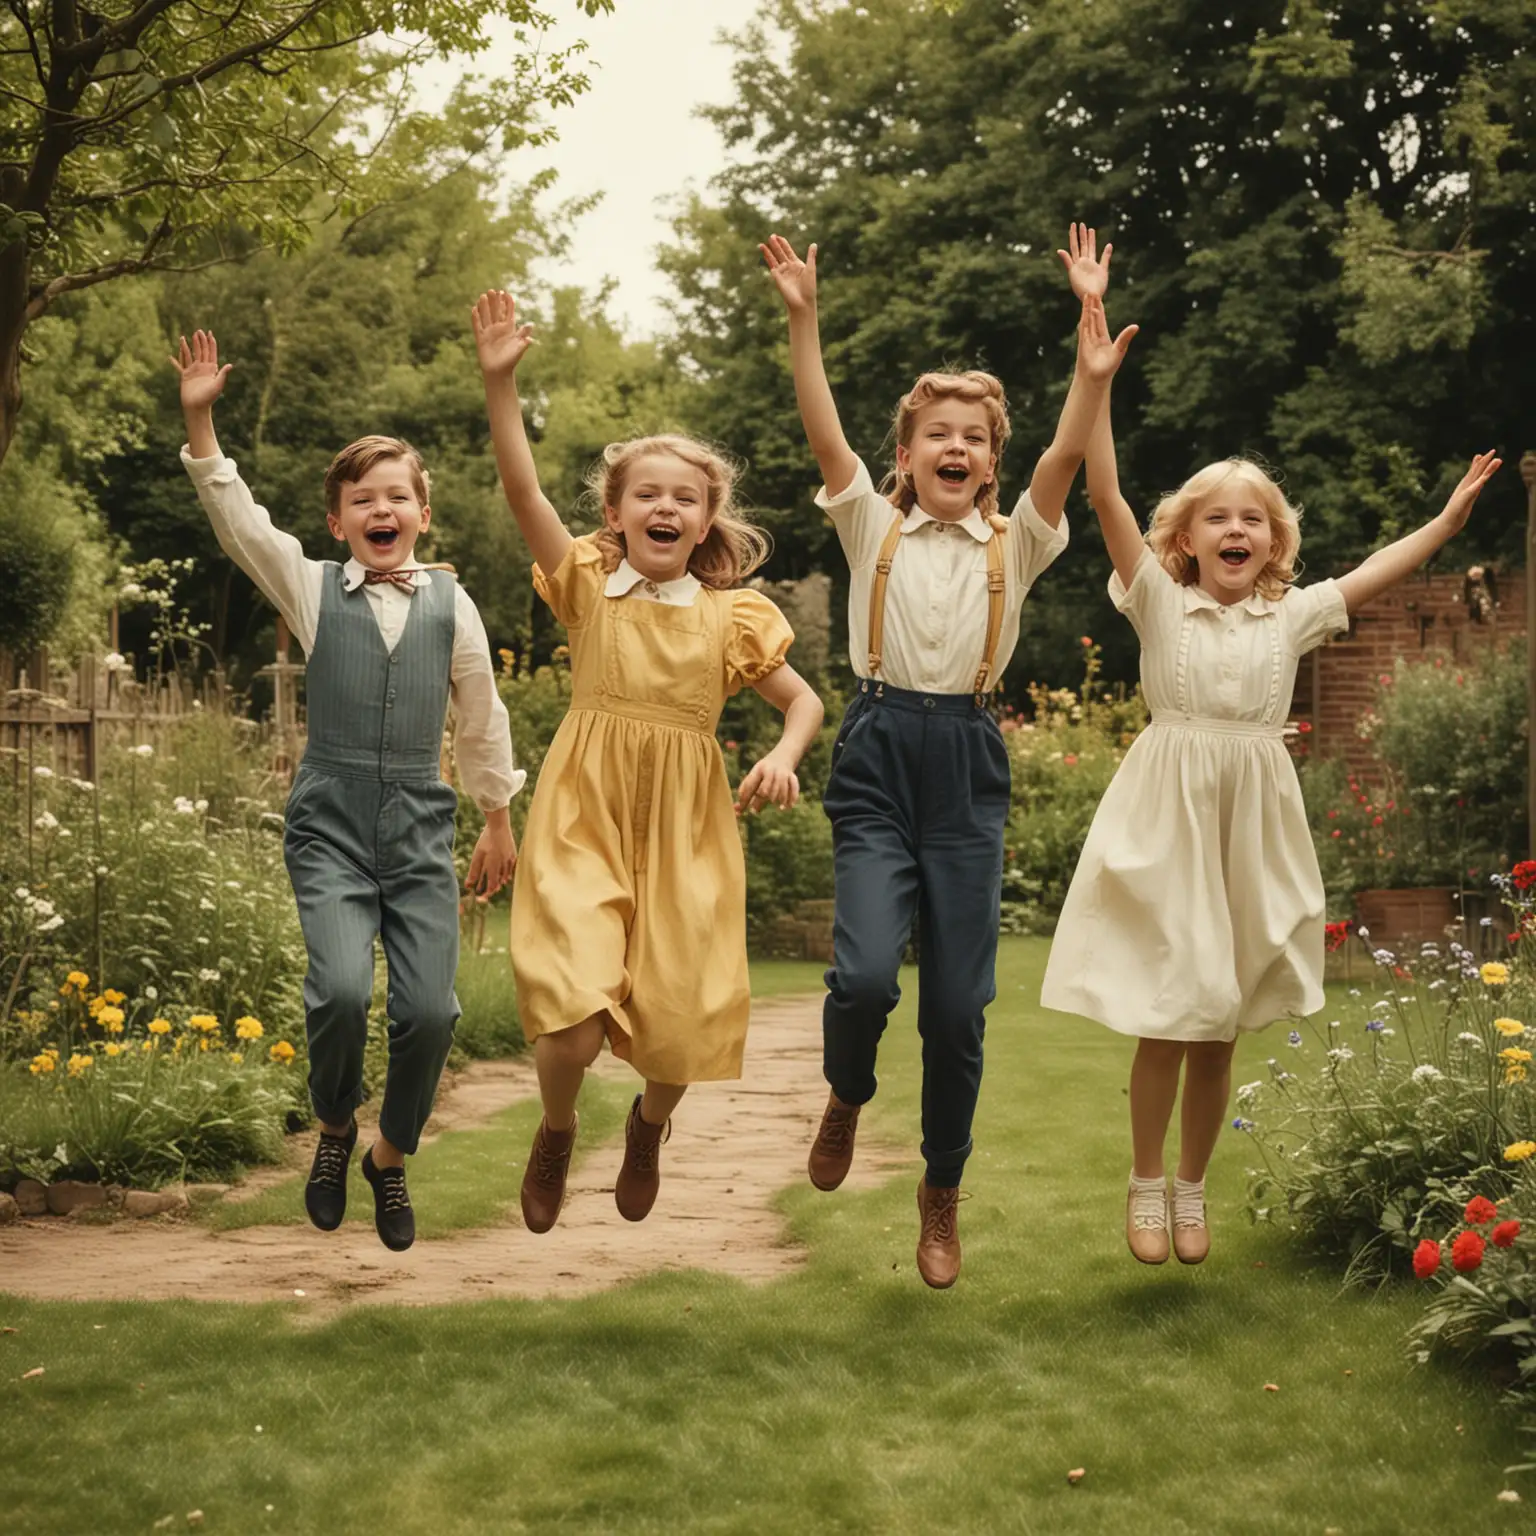 Vintage Boys and Girls Dancing with Waving Hands in a Garden